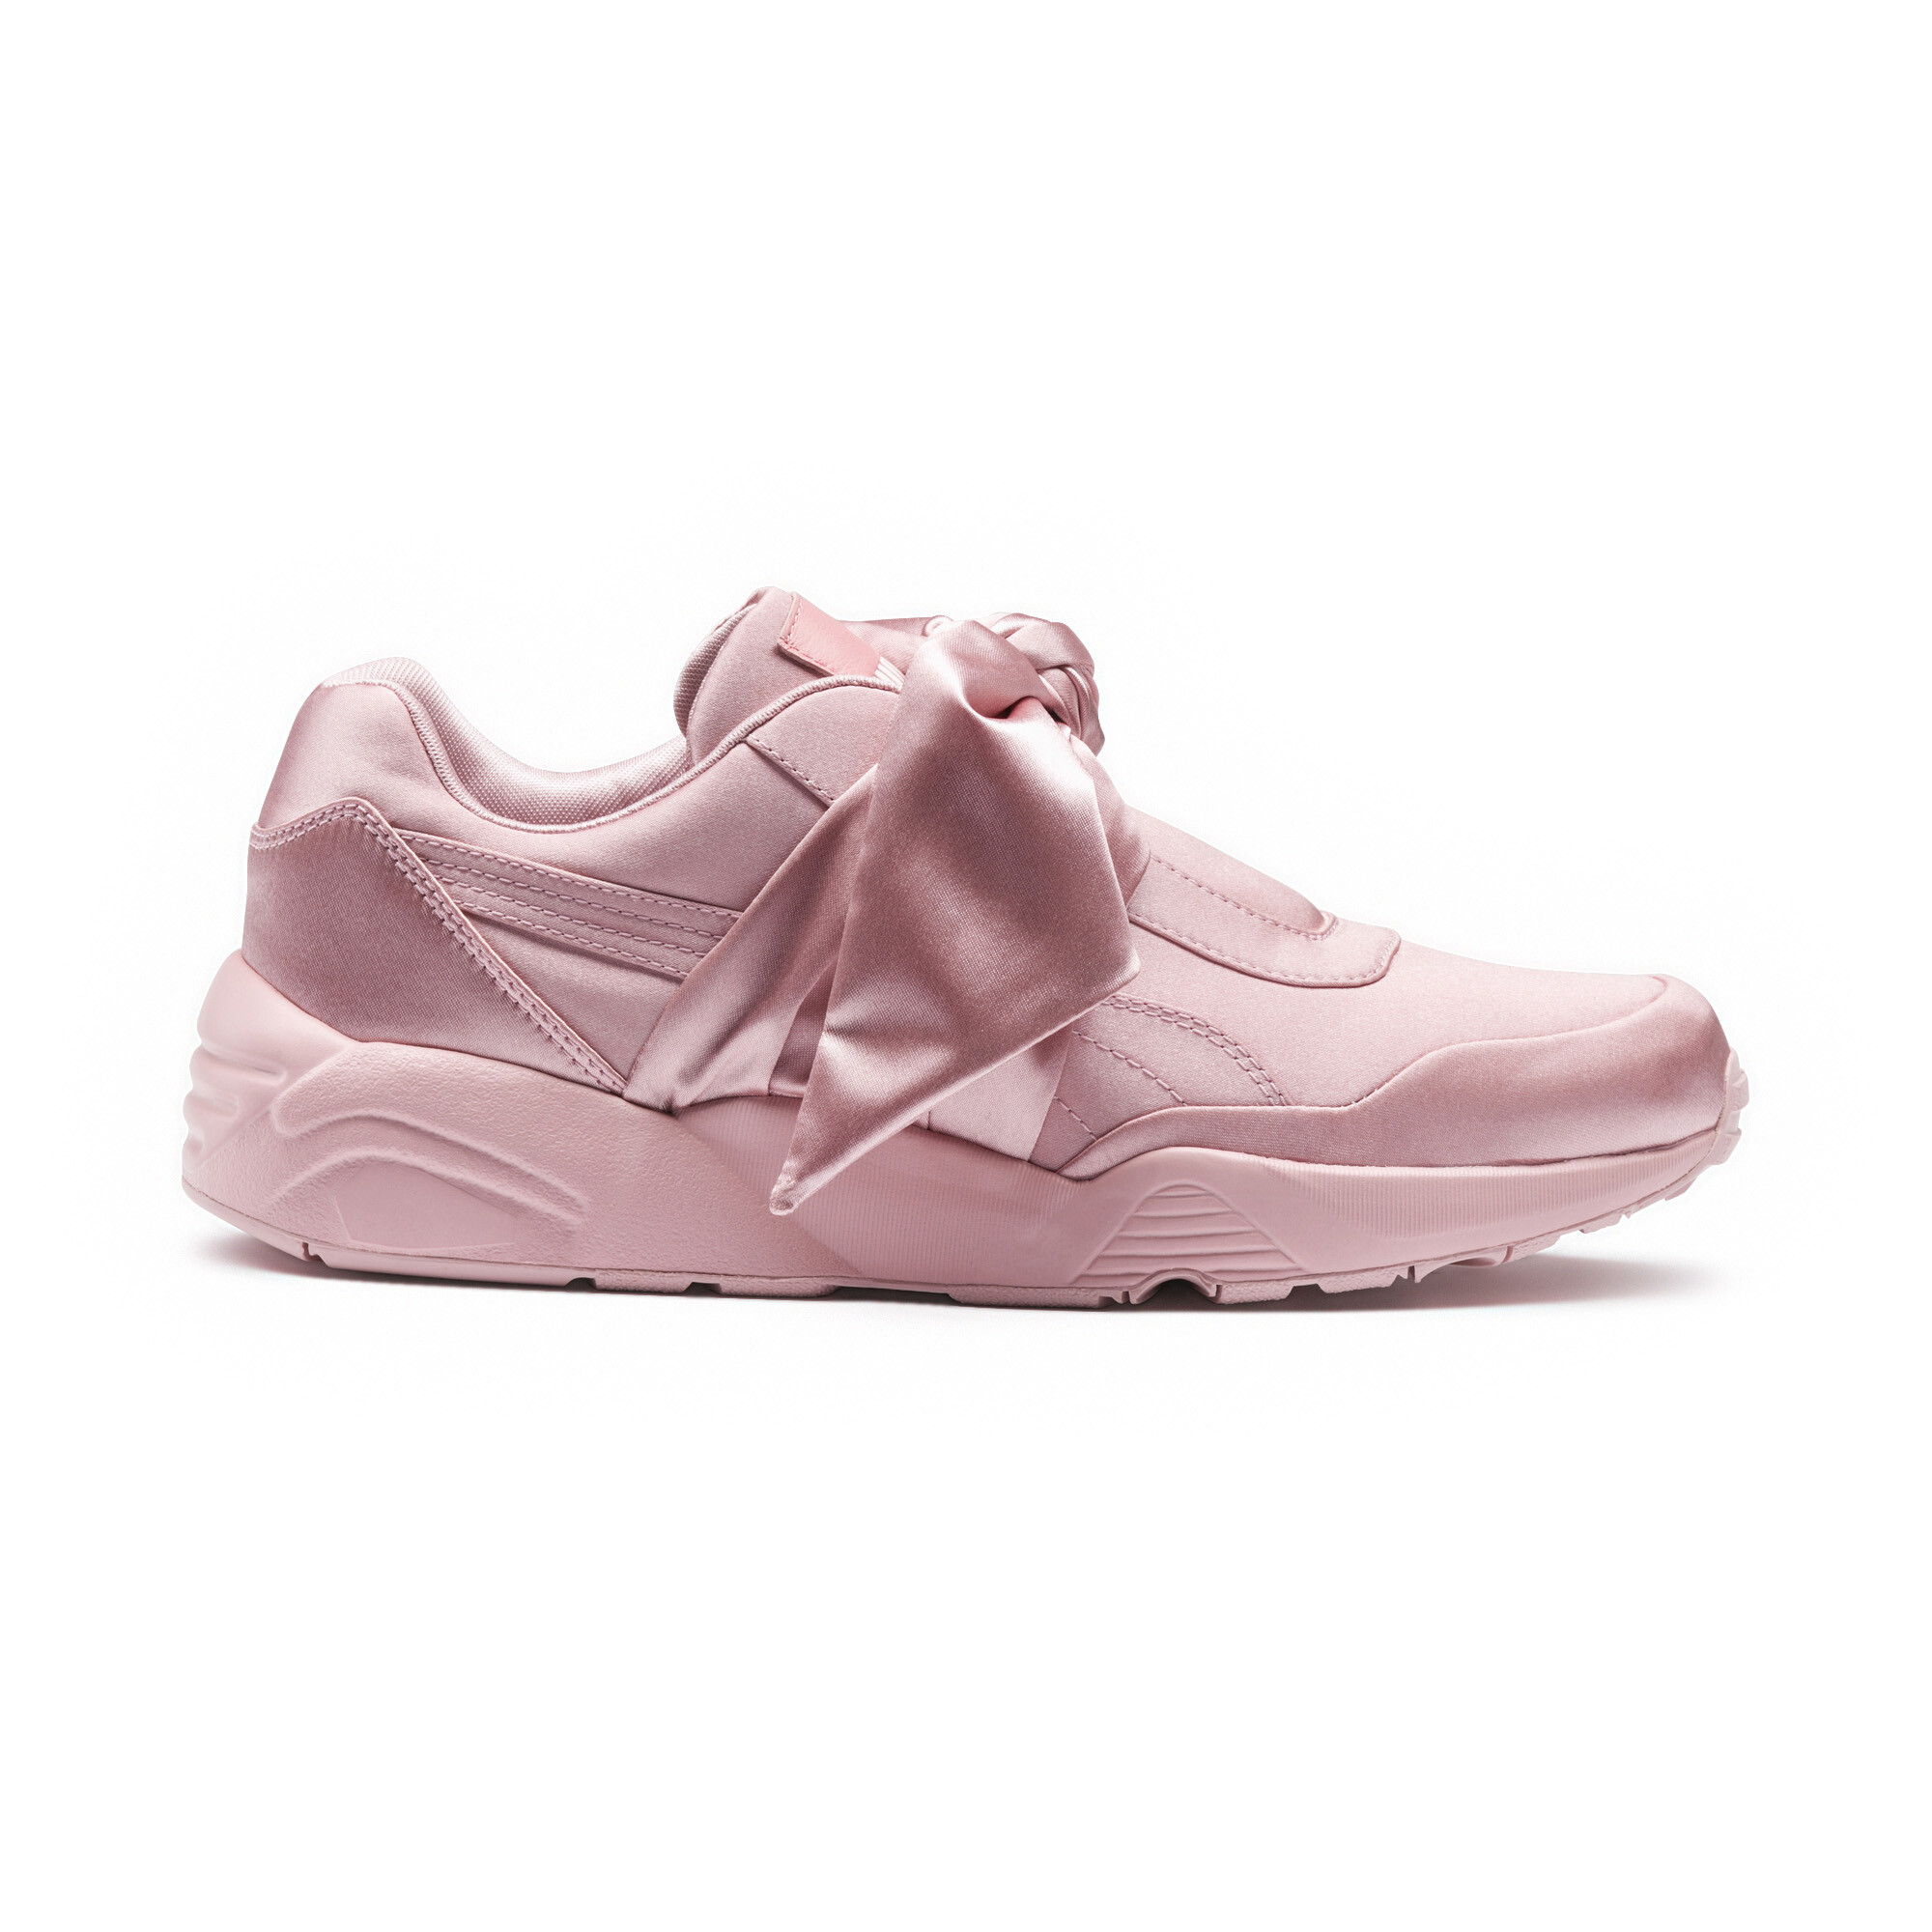 fenty puma pink bow sneakers